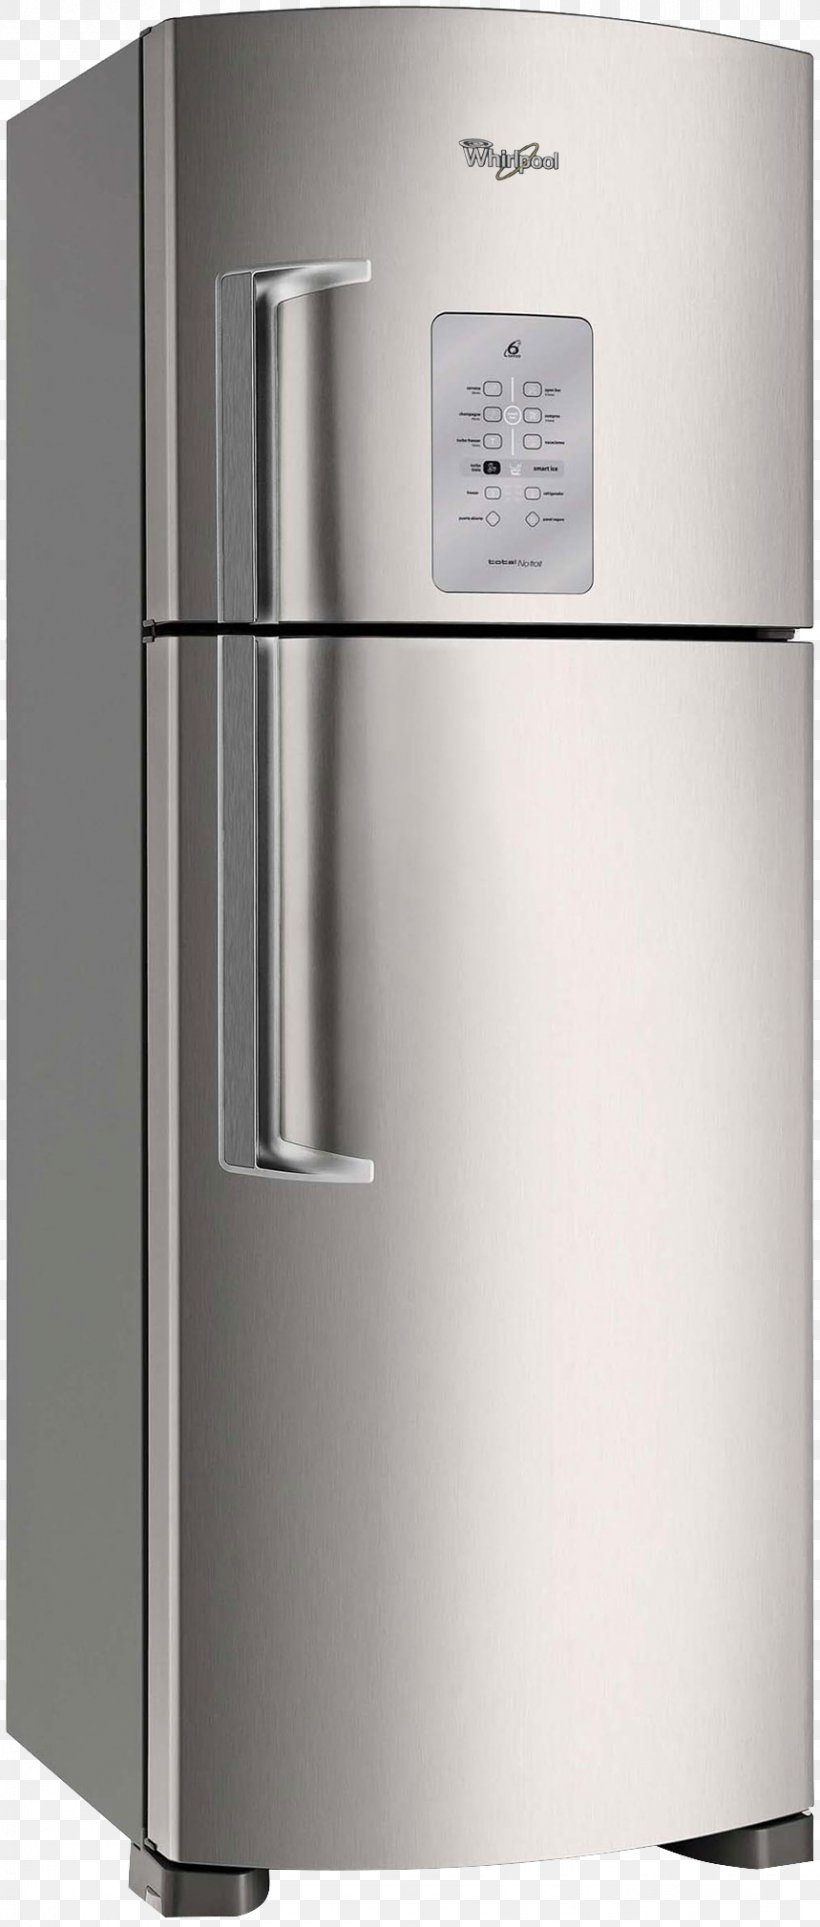 Refrigerator Auto-defrost Freezers Whirlpool Corporation Kitchen, PNG, 859x2019px, Refrigerator, Air, Autodefrost, Cooking Ranges, Drawer Download Free